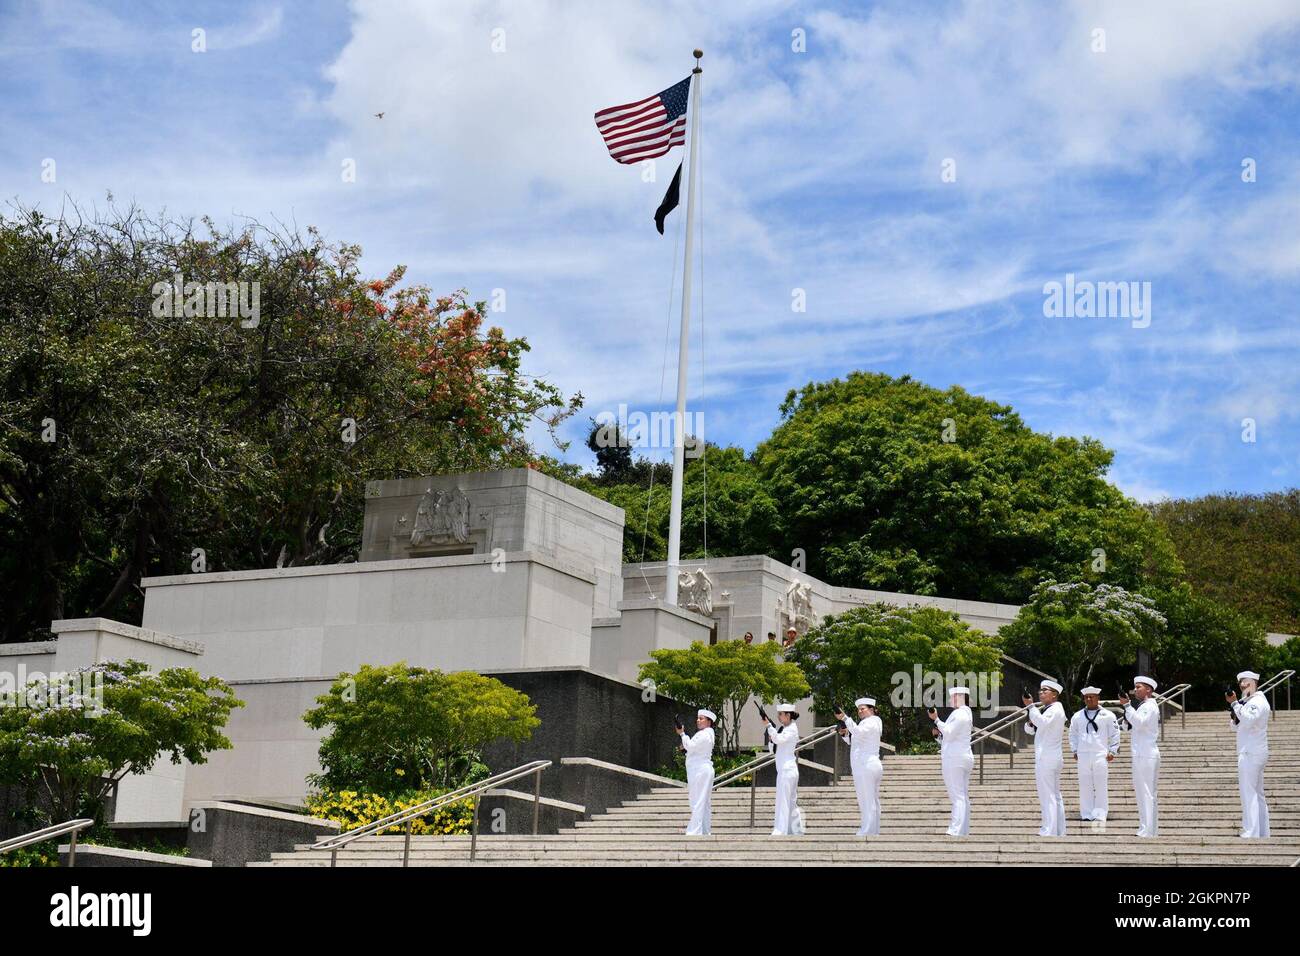 Members of the U.S. Navy Region Hawaii Honor Guard  fire a volley during a funeral for the Trapp brothers at the National Memorial Cemetery of the Pacific, Honolulu, Hawaii, June 15, 2021. The Trapp brothers were assigned to the USS Oklahoma, which sustained fire from Japanese aircraft and multiple torpedo hits causing the ship to capsize and resulted in the deaths of more than 400 crew members on Dec. 7, 1941, at Ford Island, Pearl Harbor. The Trapp brothers were recently identified through DNA analysis by the Defense POW/MIA Accounting Agency (DPAA) forensic laboratory and laid to rest with Stock Photo